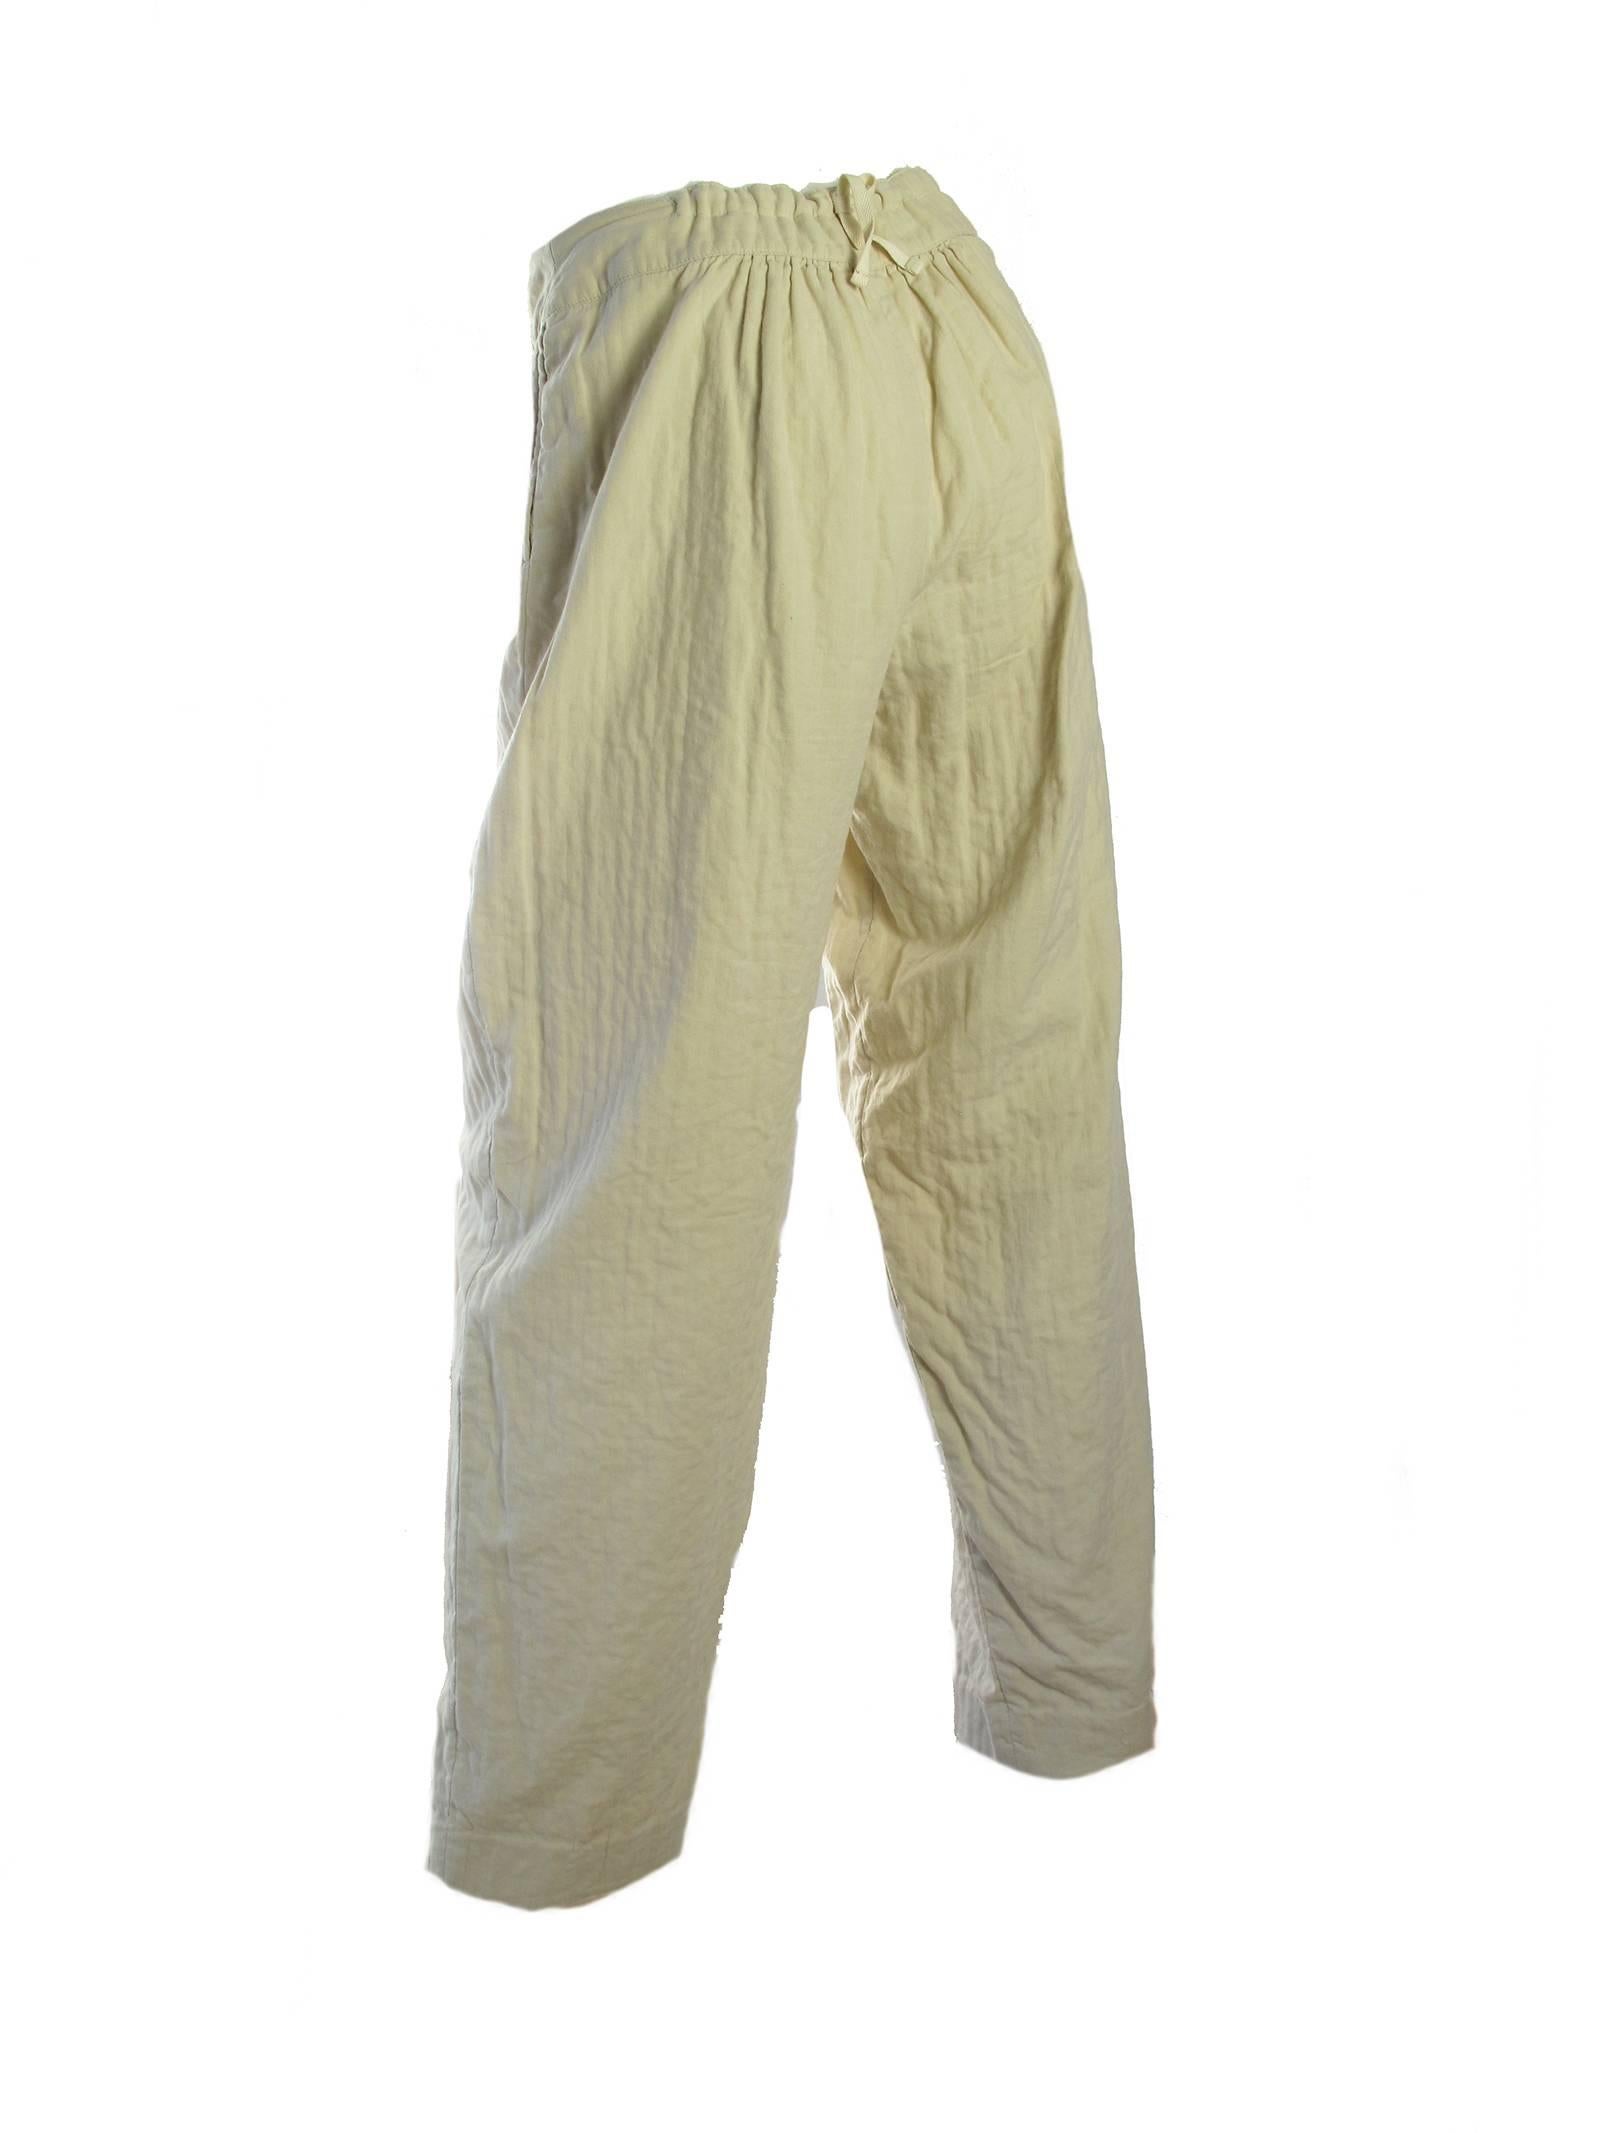 1980's Issey Miyake cream cotton pants.  High waisted with drawstring at back. Condition: very good, spot on front, small hole.  Size 6/ 8